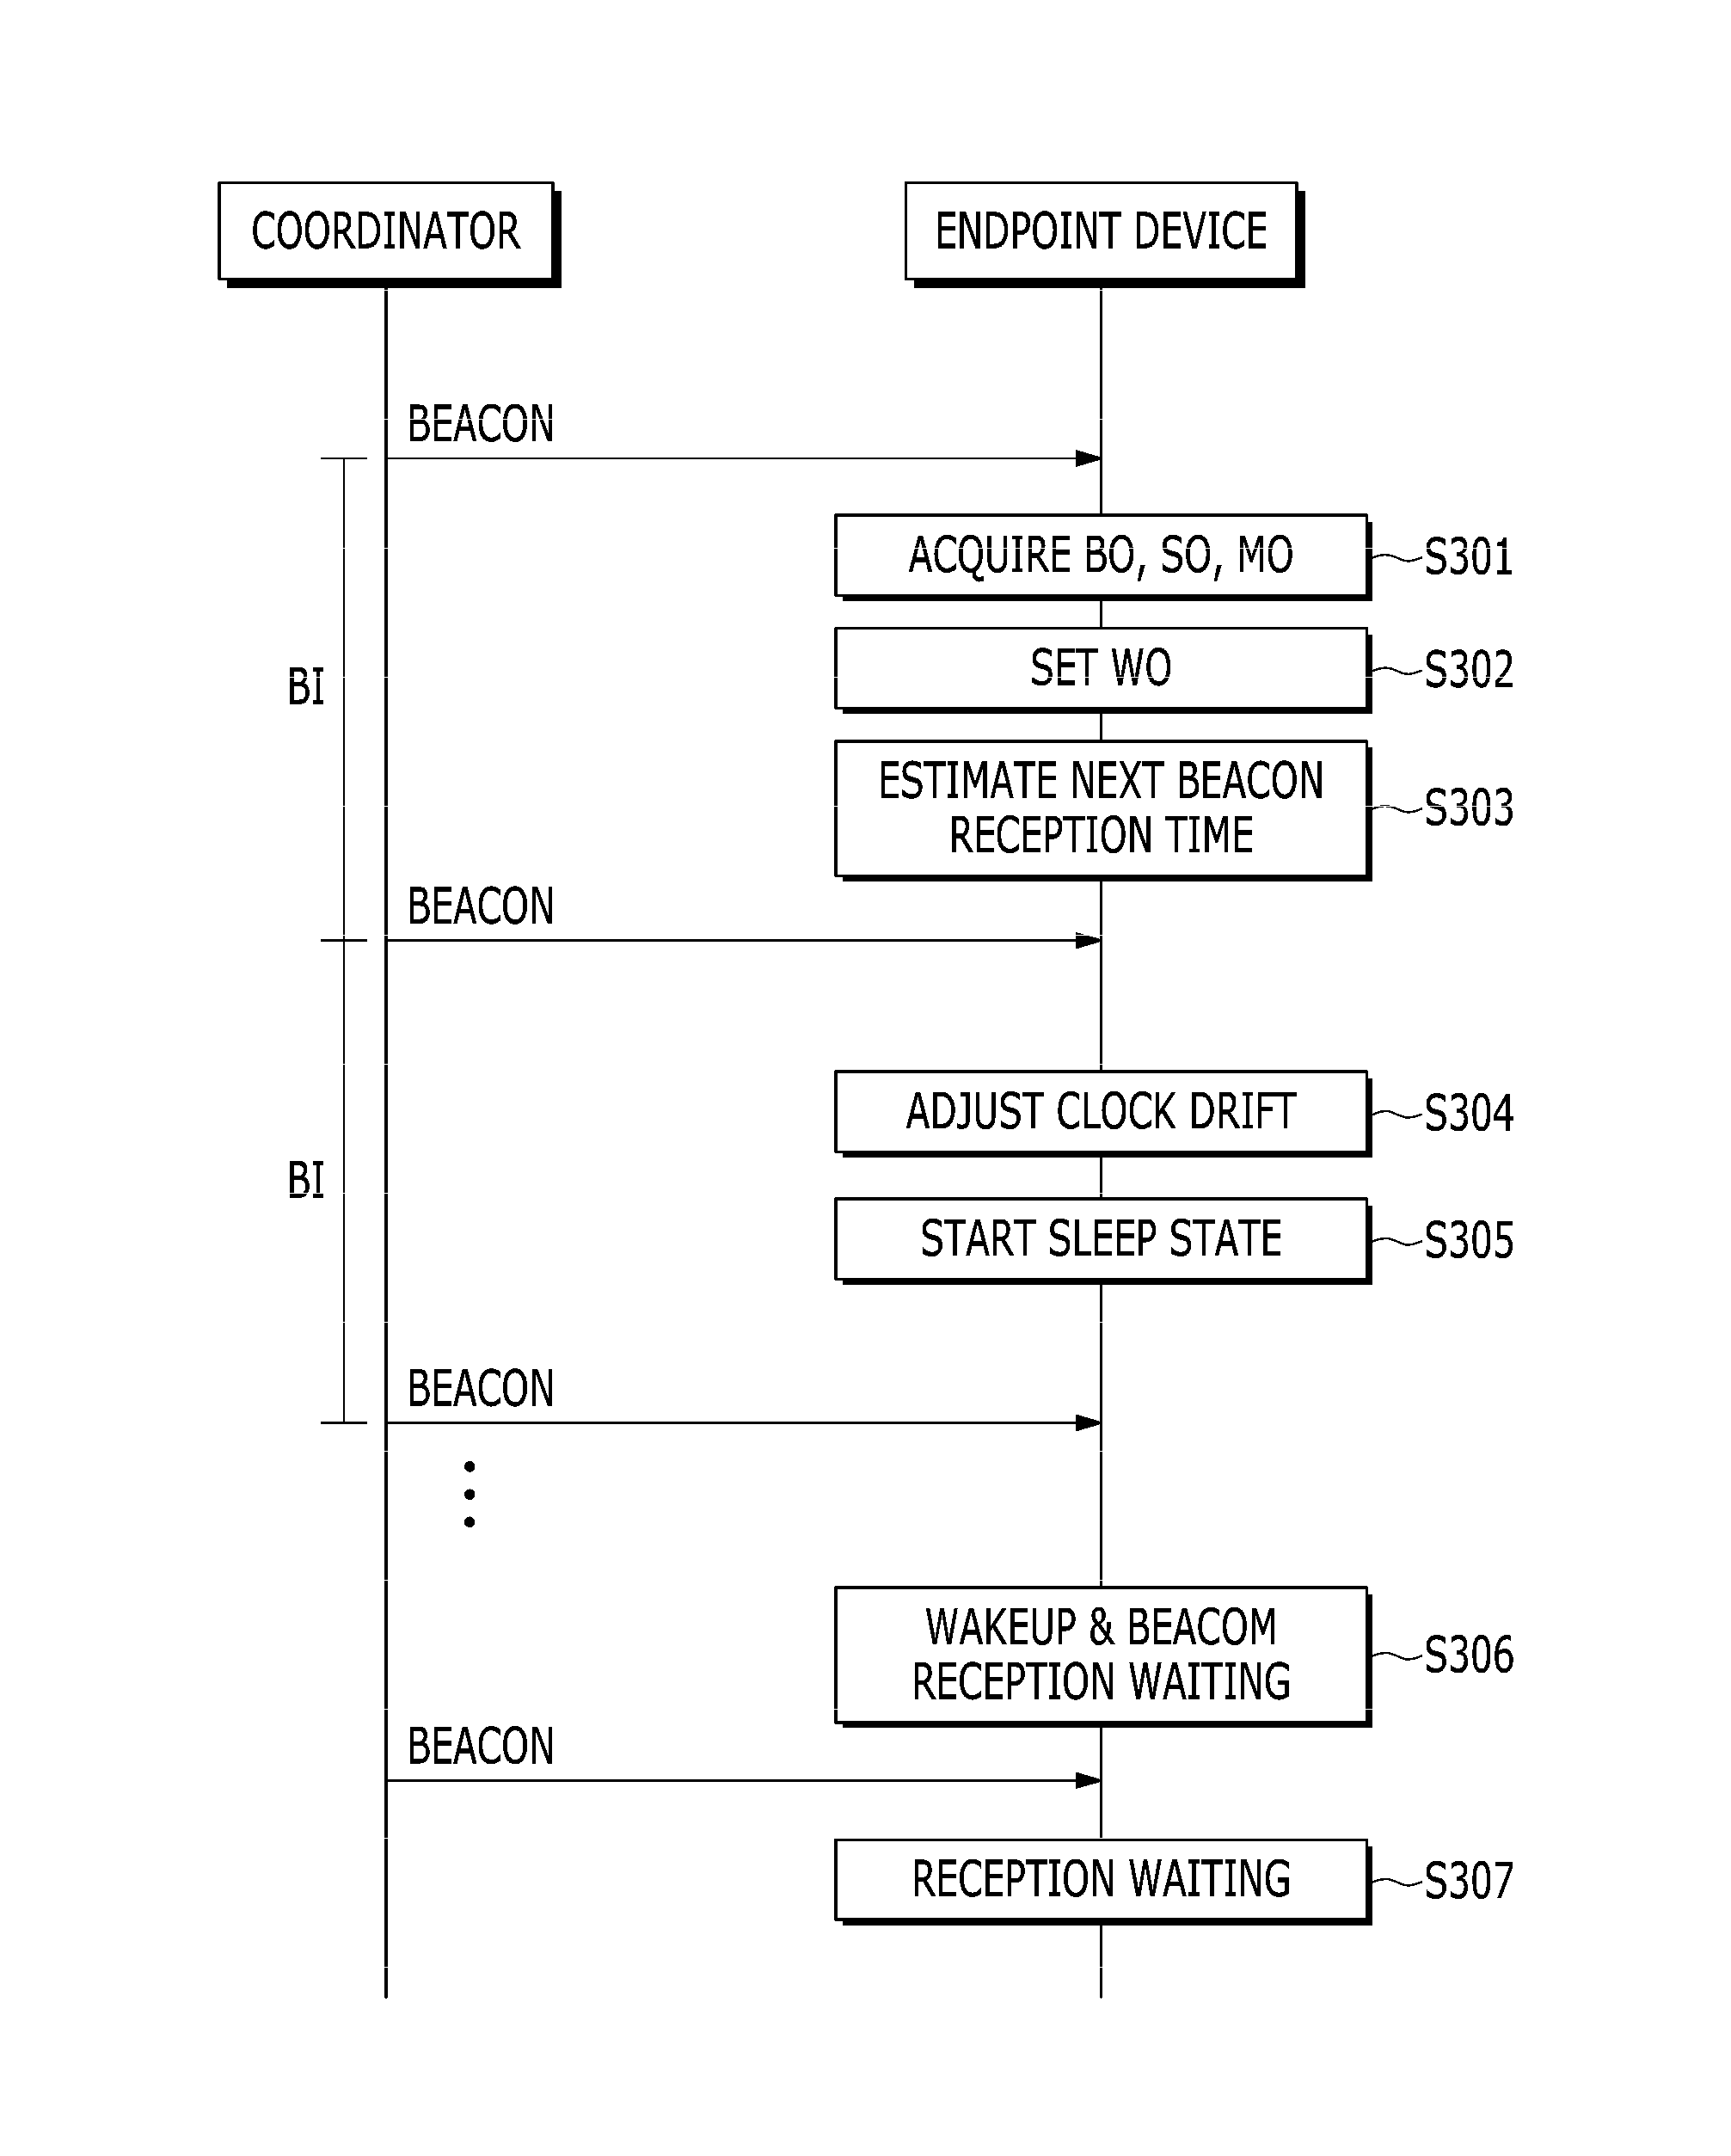 Method of synchronization and link access for low energy critical infrastructure monitoring network